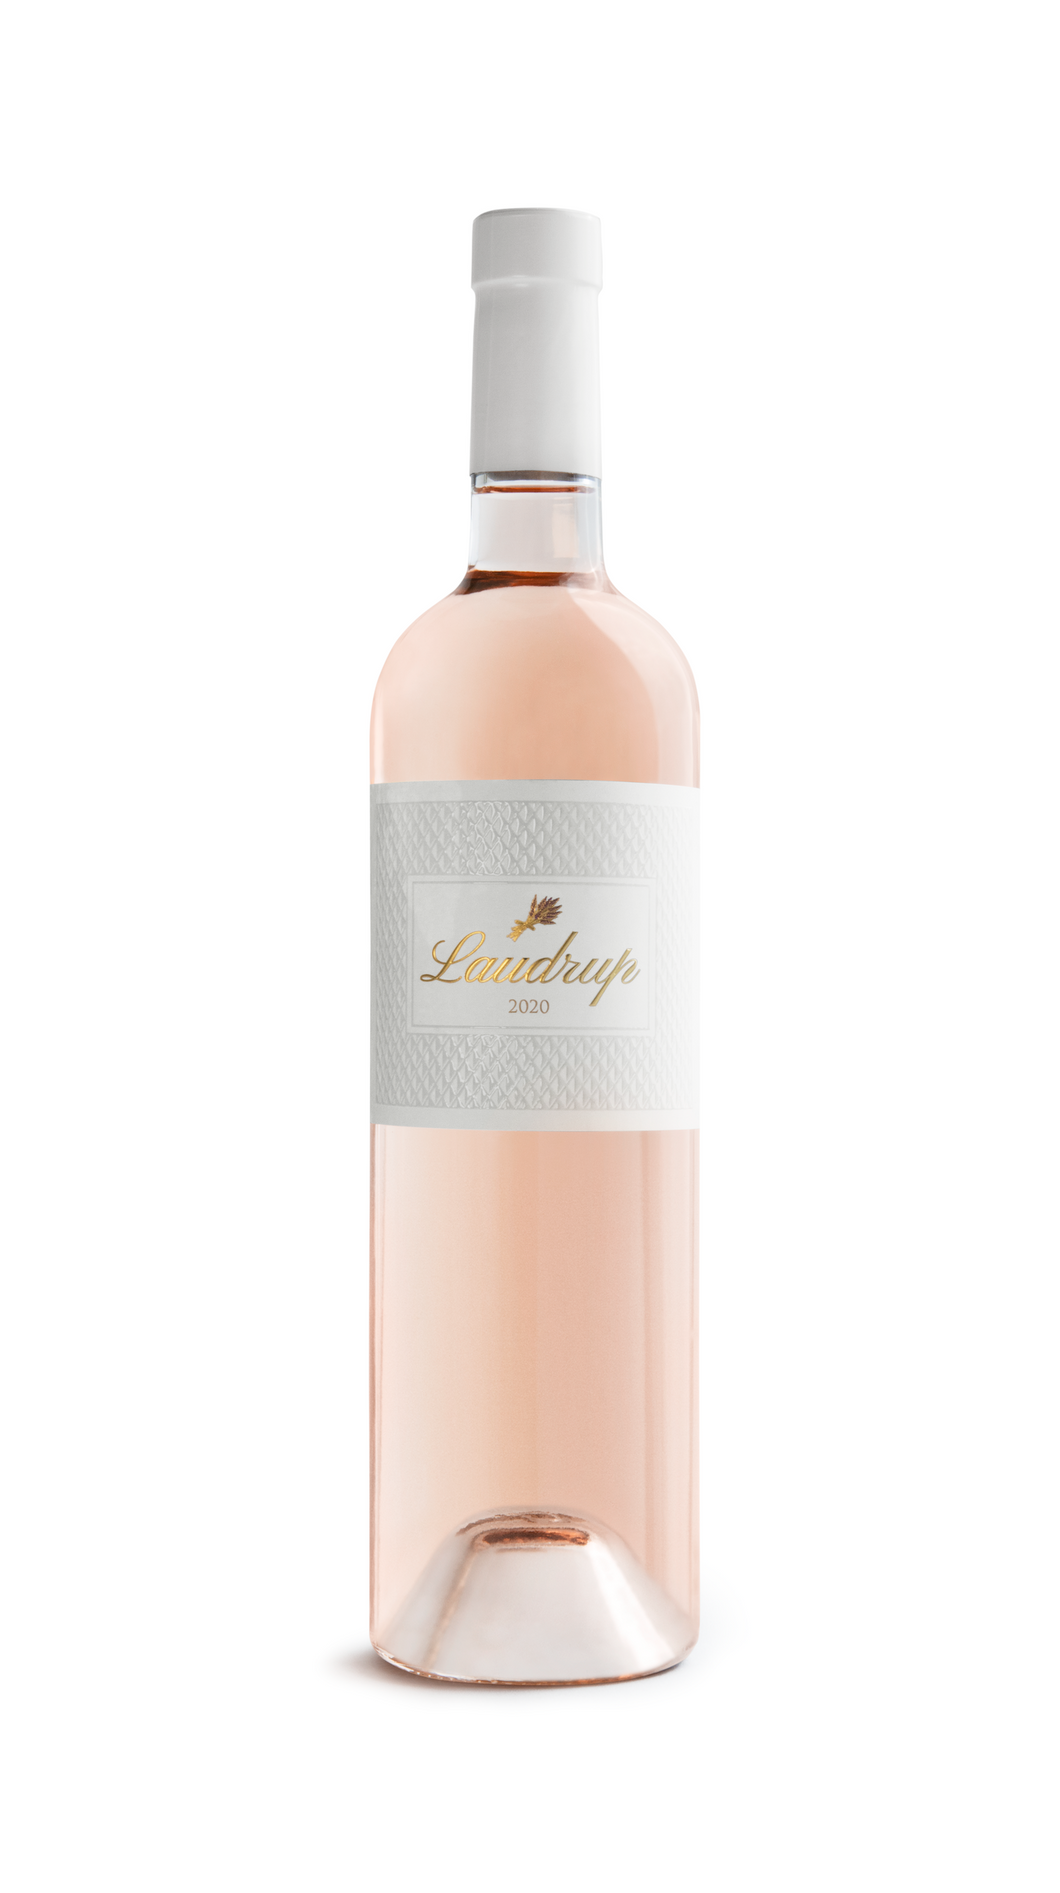 Bottle of Laudrup Rose Wine